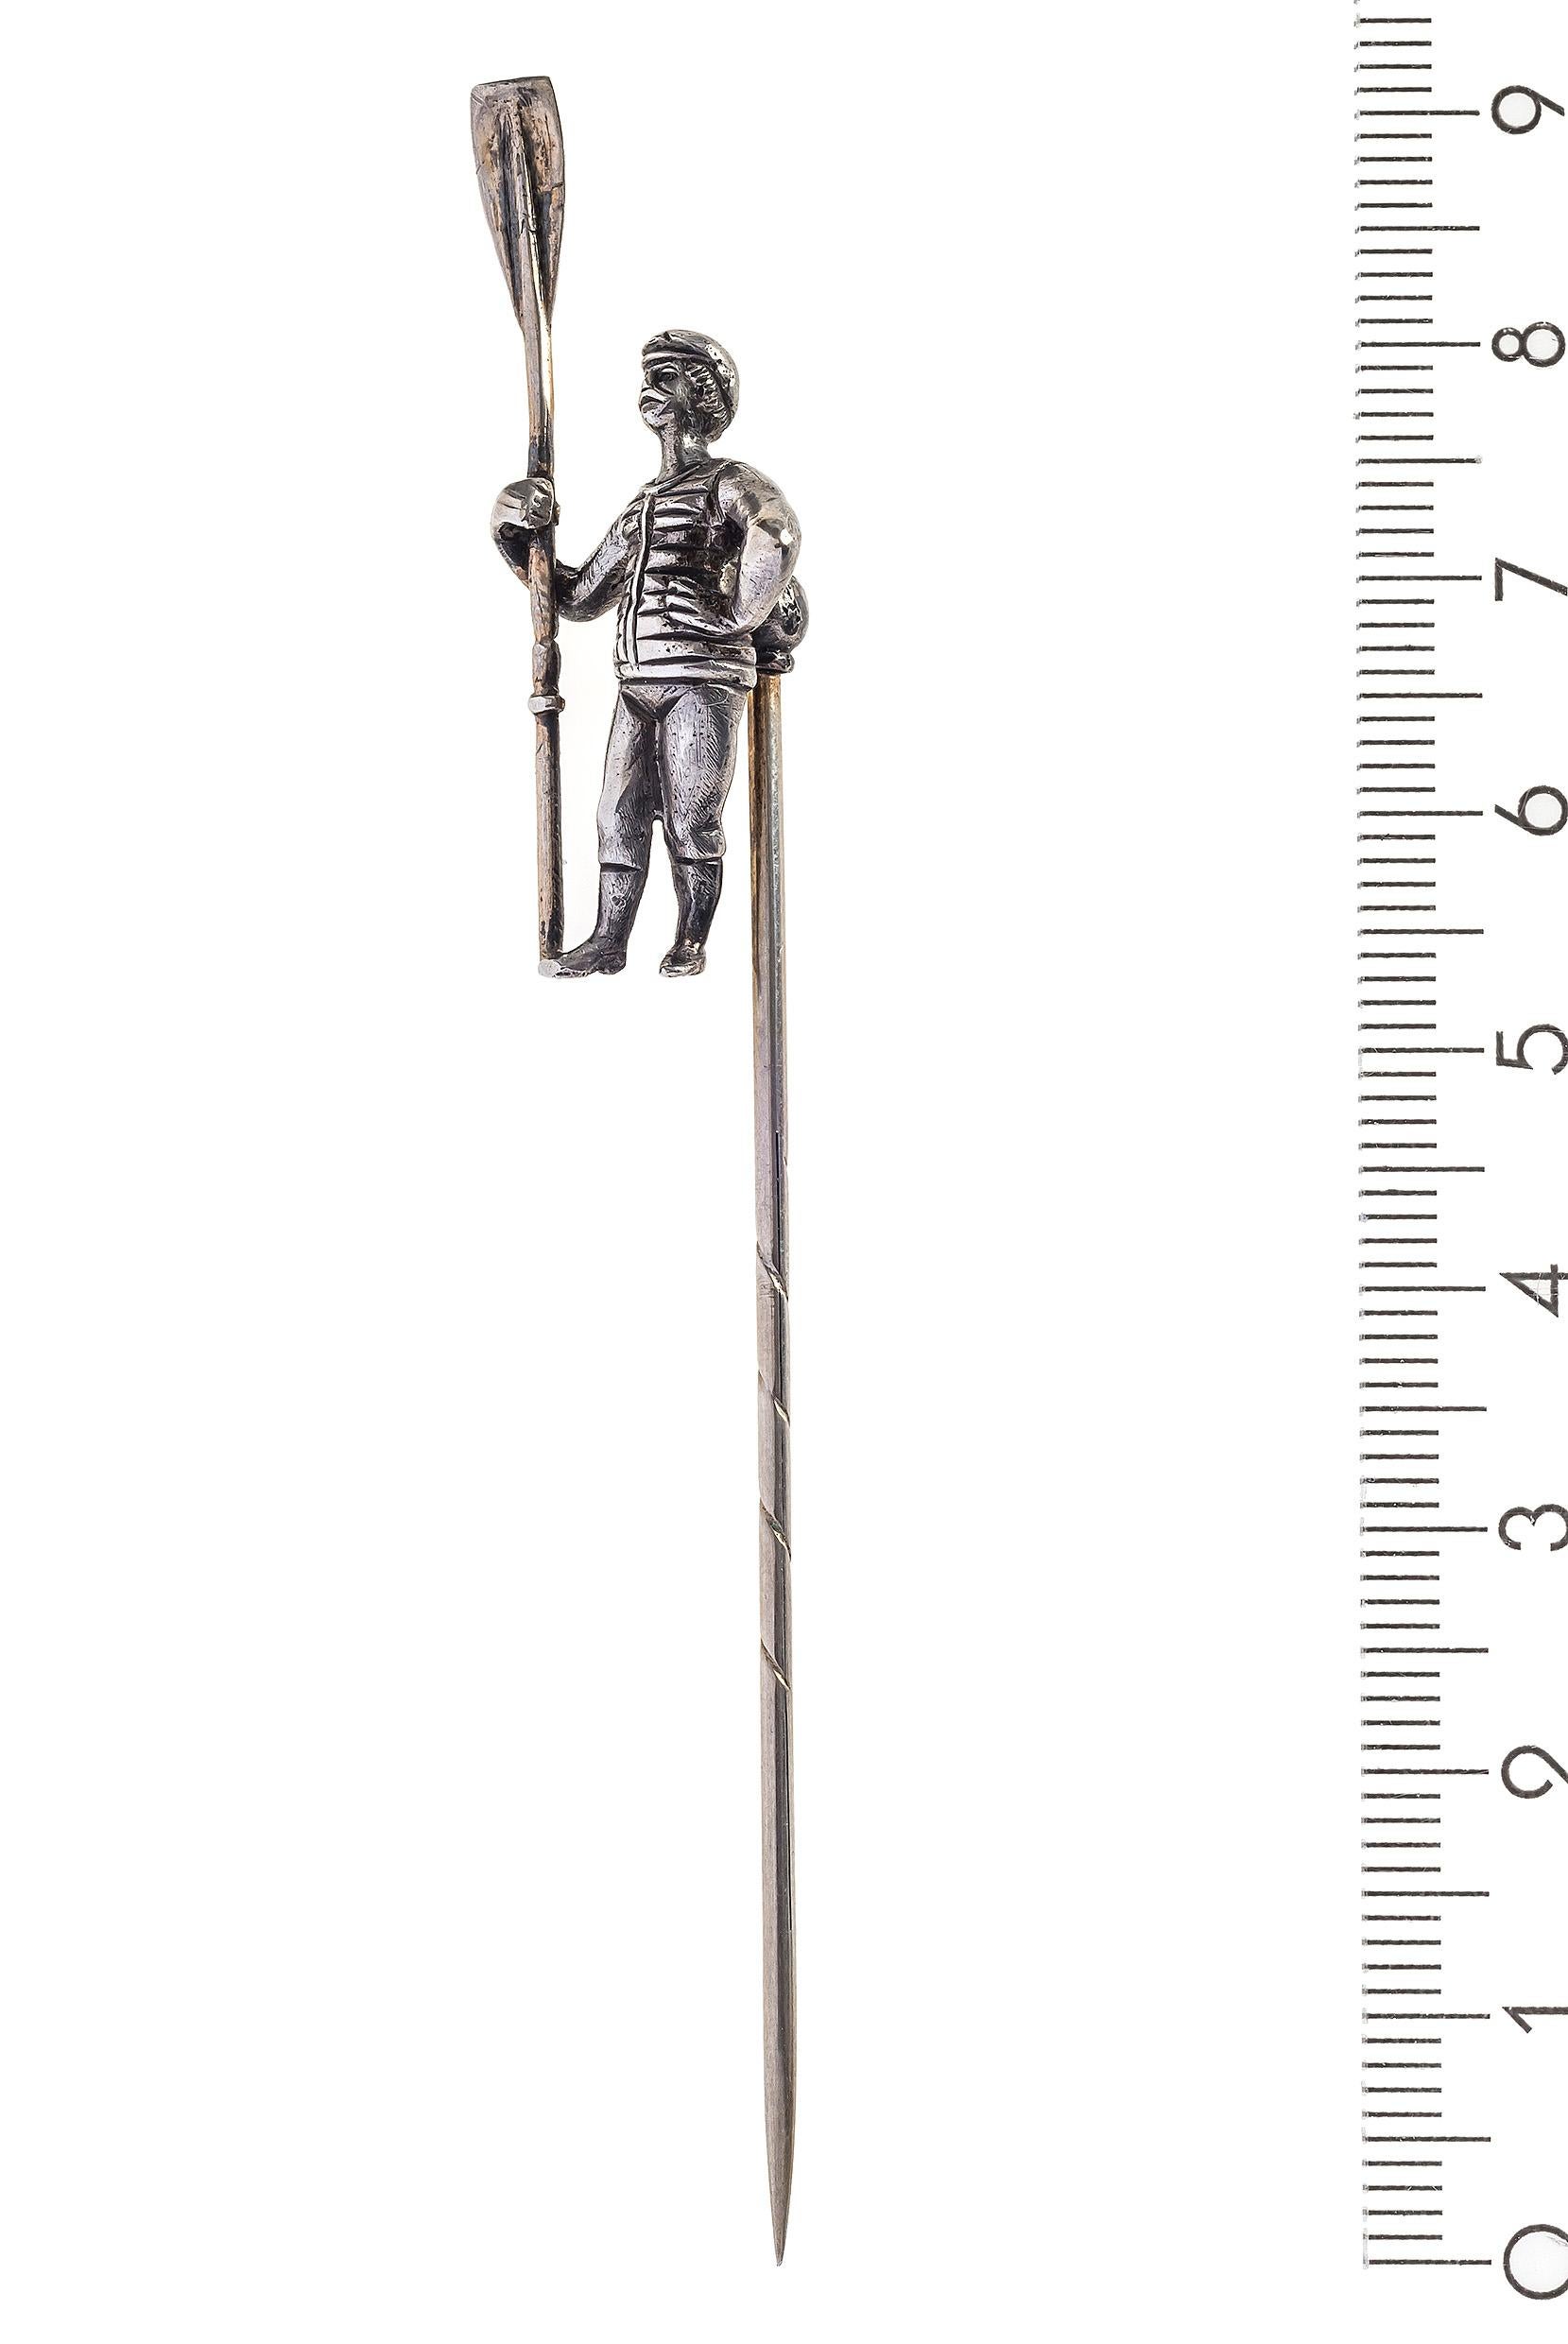 Unusual silver stick pin depicting a bearded rower with a flat cap, moustache, tricot, trousers and boots. He is holding an oar in his right hand. Traces of gilding on the oar and the stick pin. Unidentified makers mark. The pin is from the period